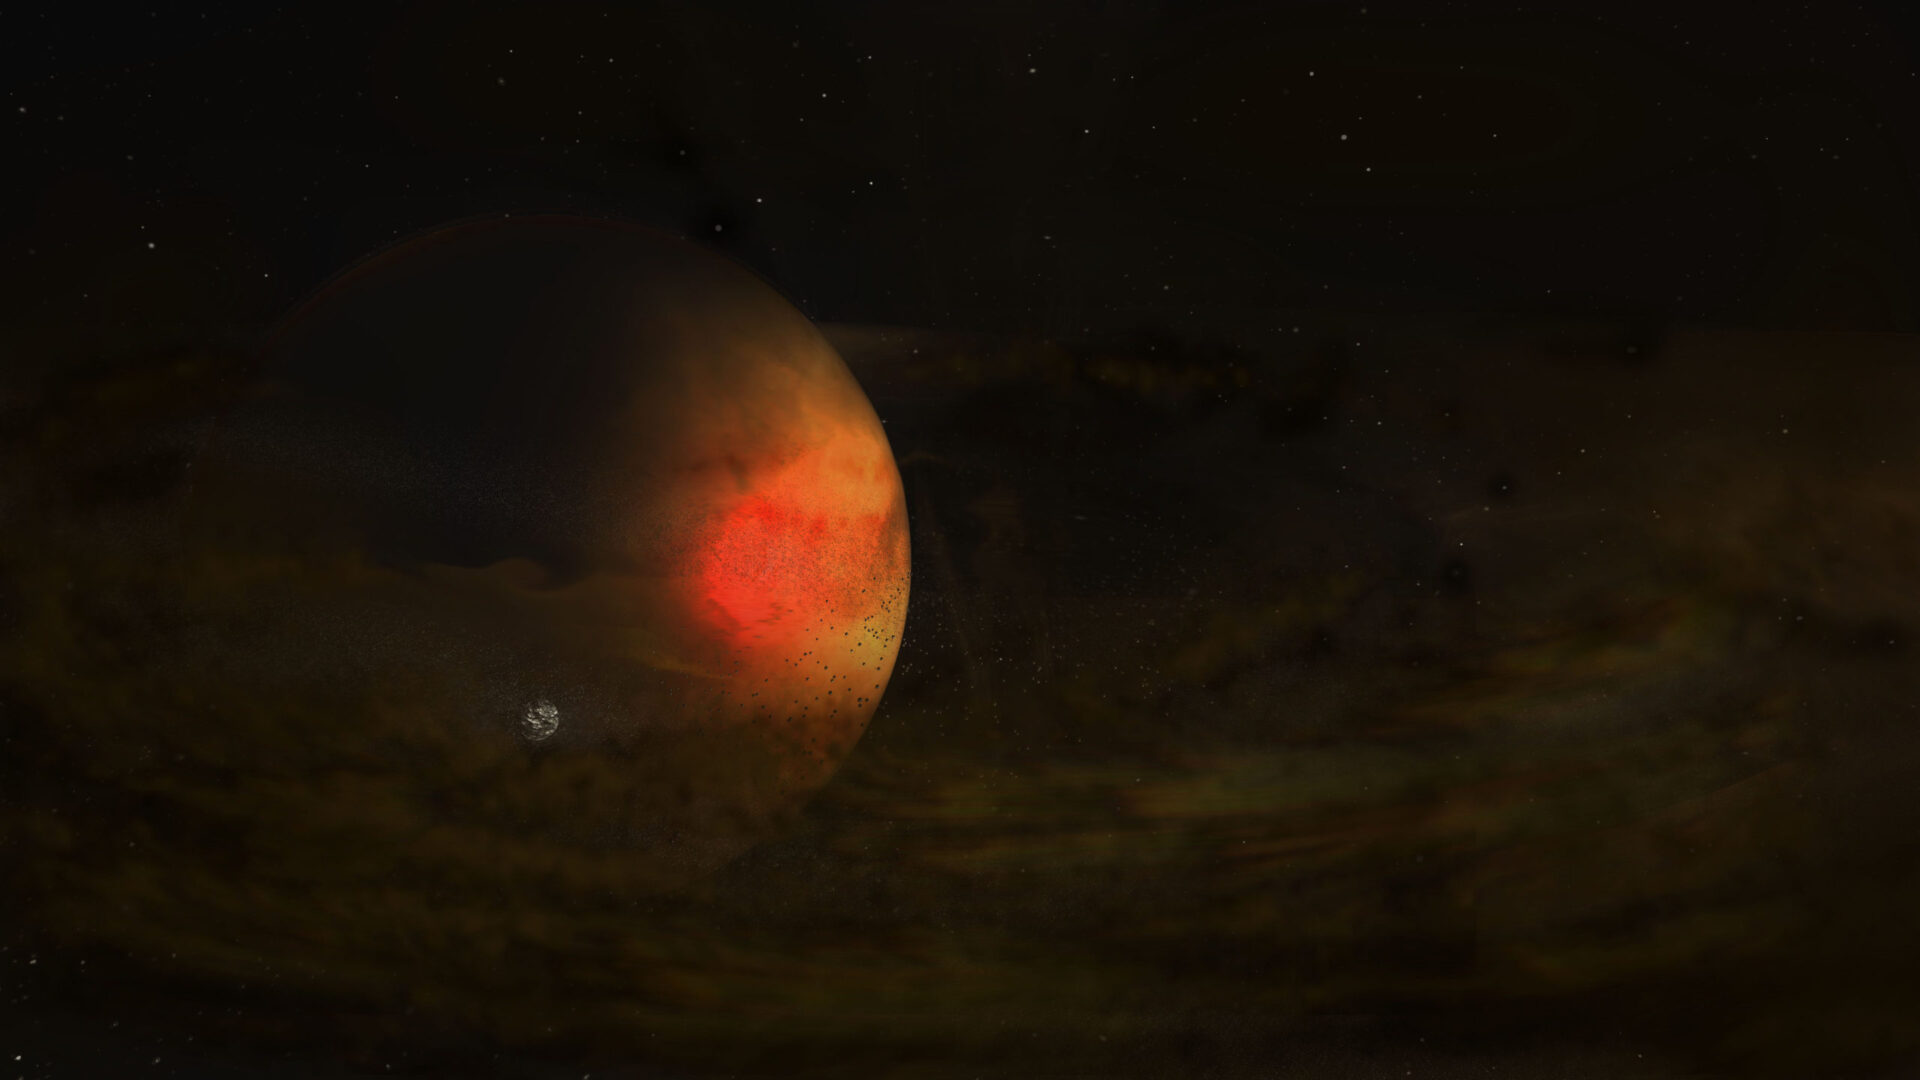 <p>Artist impression of the circumplanetary disk discovered in 2021 around a young planet in the PDS 70 star system. Credit: ALMA (ESO/NAOJ/NRAO), S. Dagnello (NRAO/AUI/NSF)</p>
